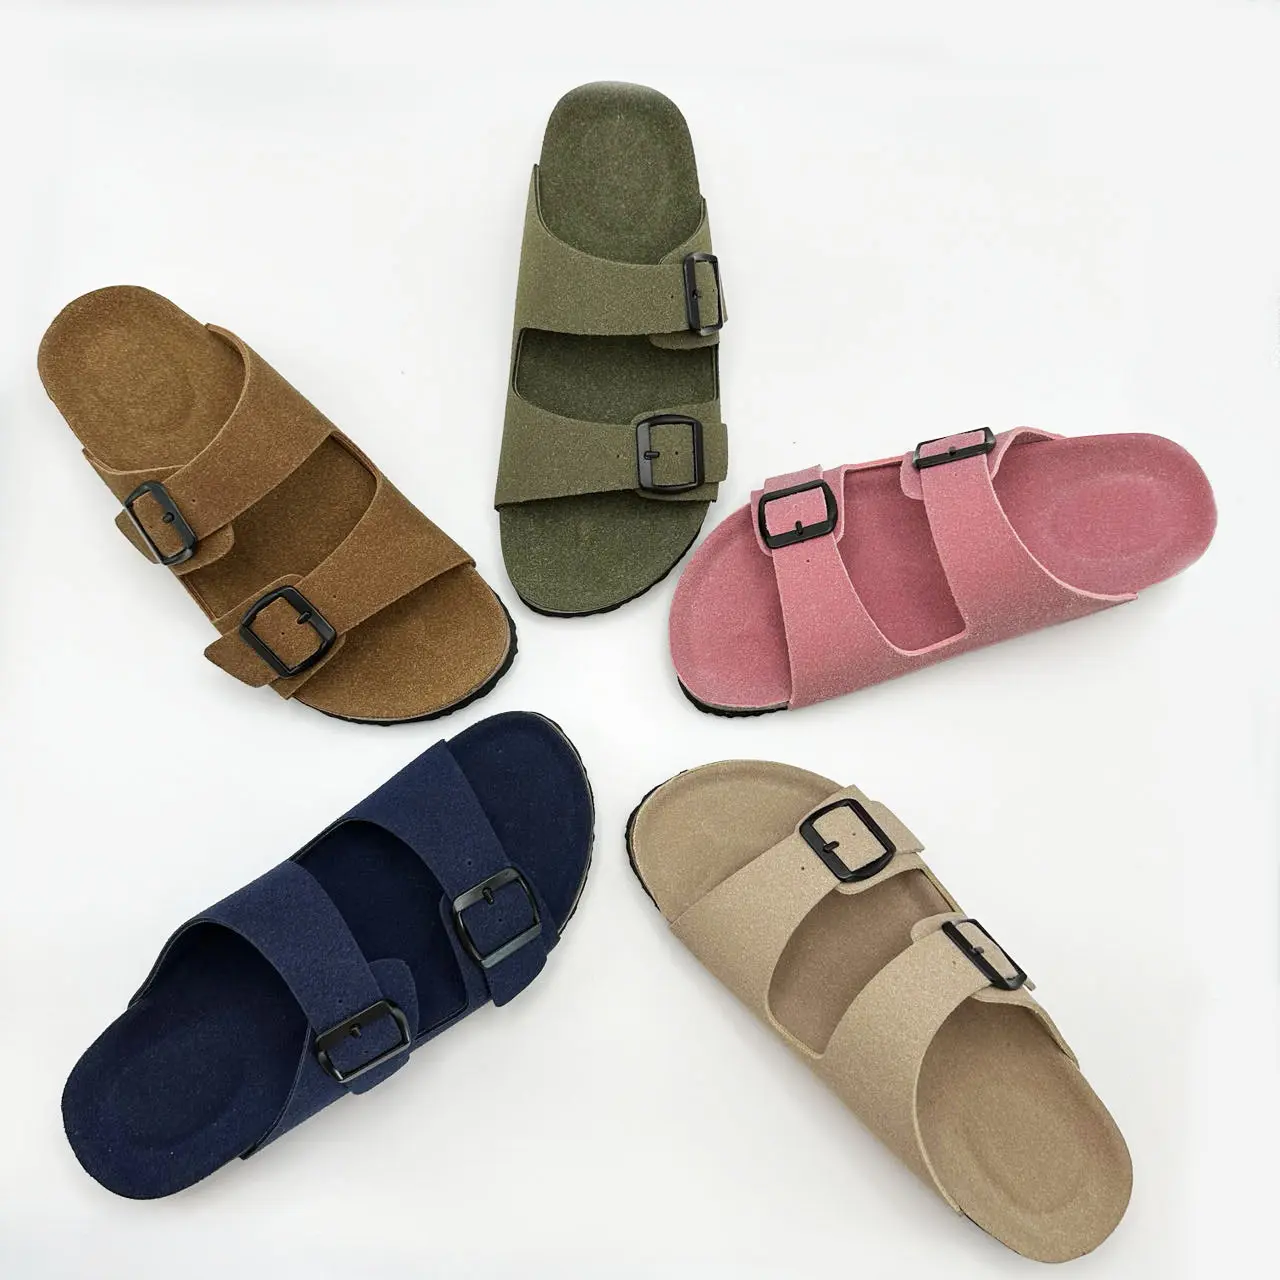 Custom Logo Mens Sandals Outdoor Beach Shoes High Quality Women's Sandals EVA Style Spring Cow Cotton Carton Cow Leather Jinling